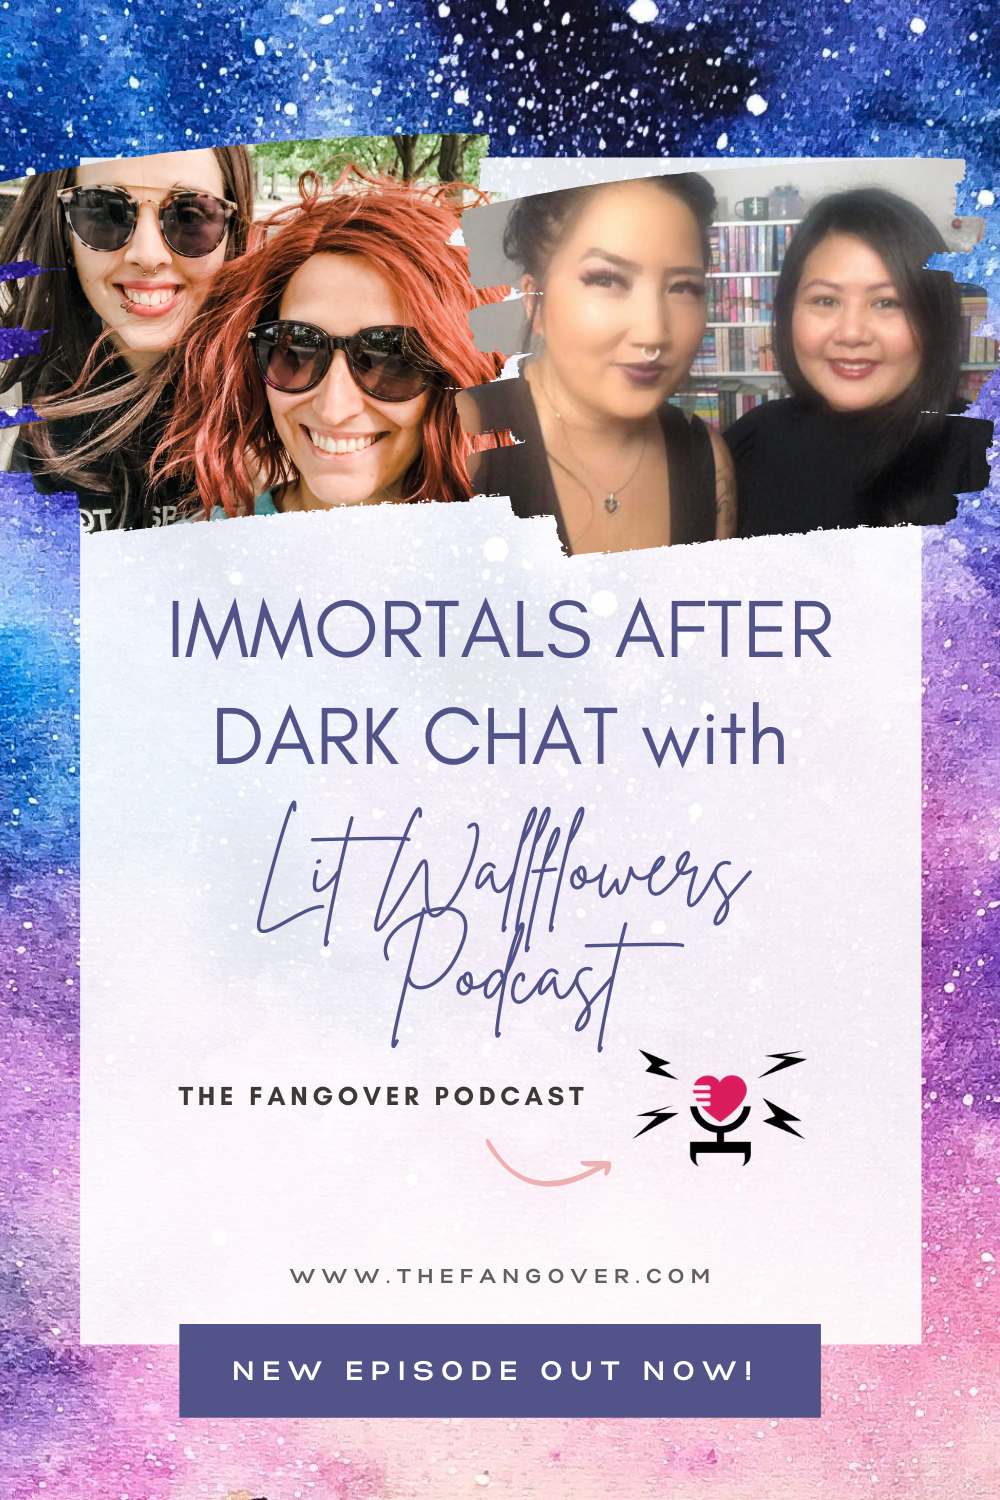 S2 E17 Immortals After Dark Chat with Lit Wallflowers Podcast